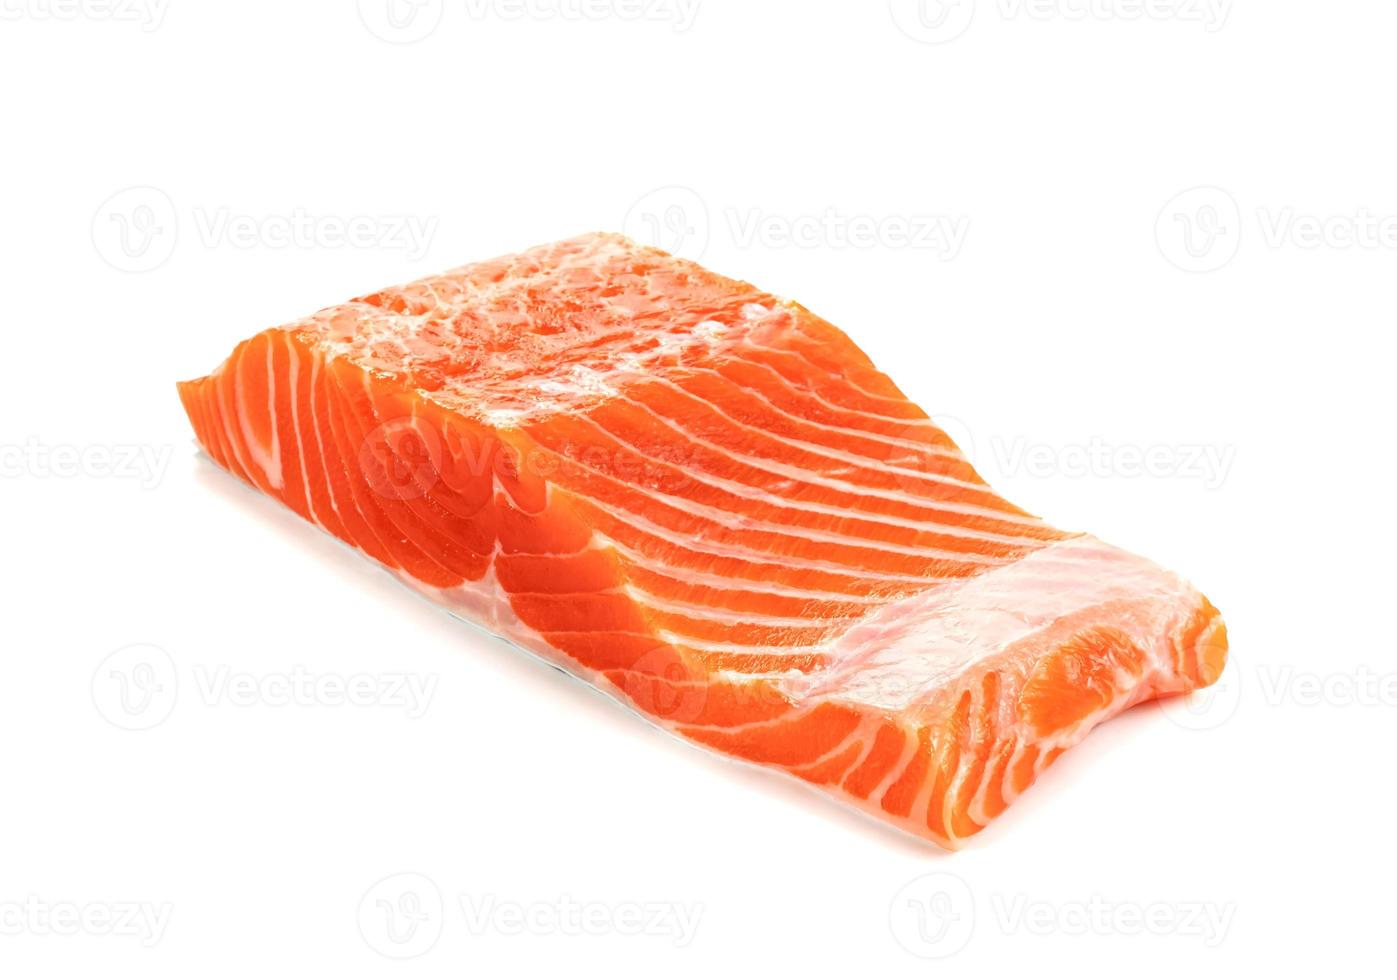 Piece of fresh salmon fillet sliced isolated on white background photo